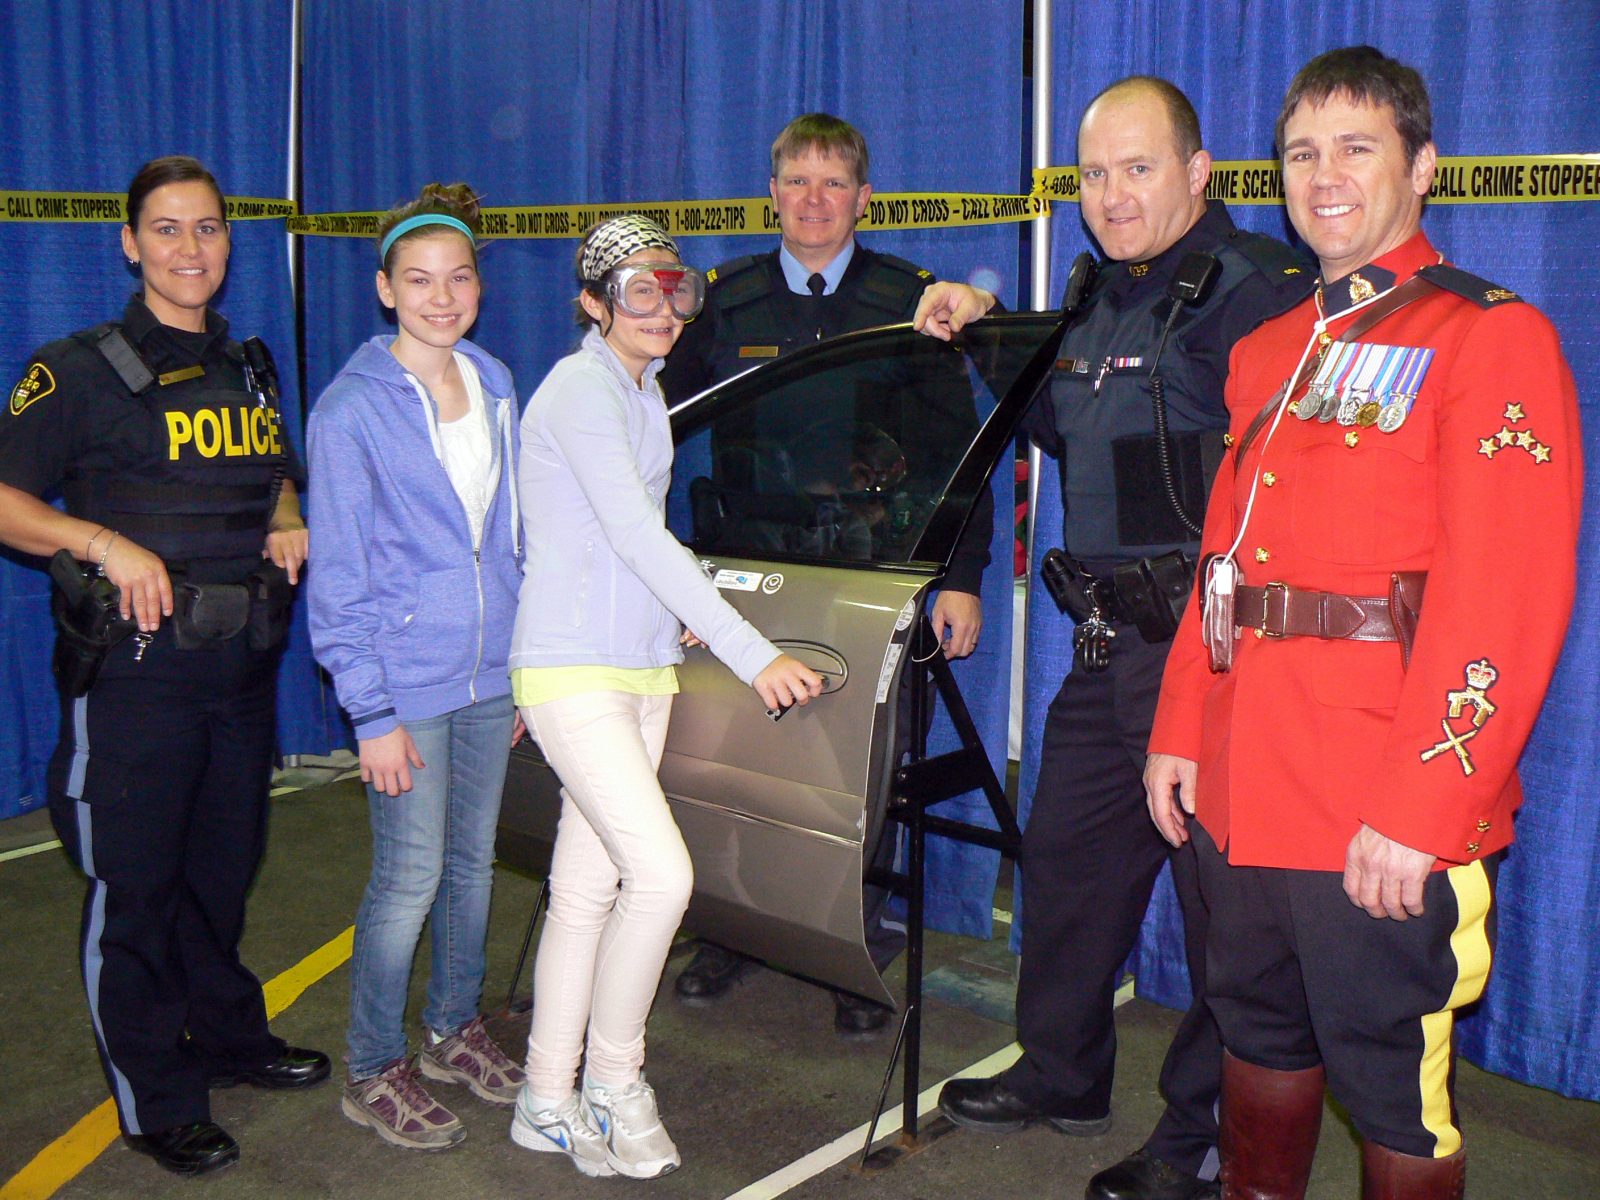 Racing Against Drugs spreads its message at armouries